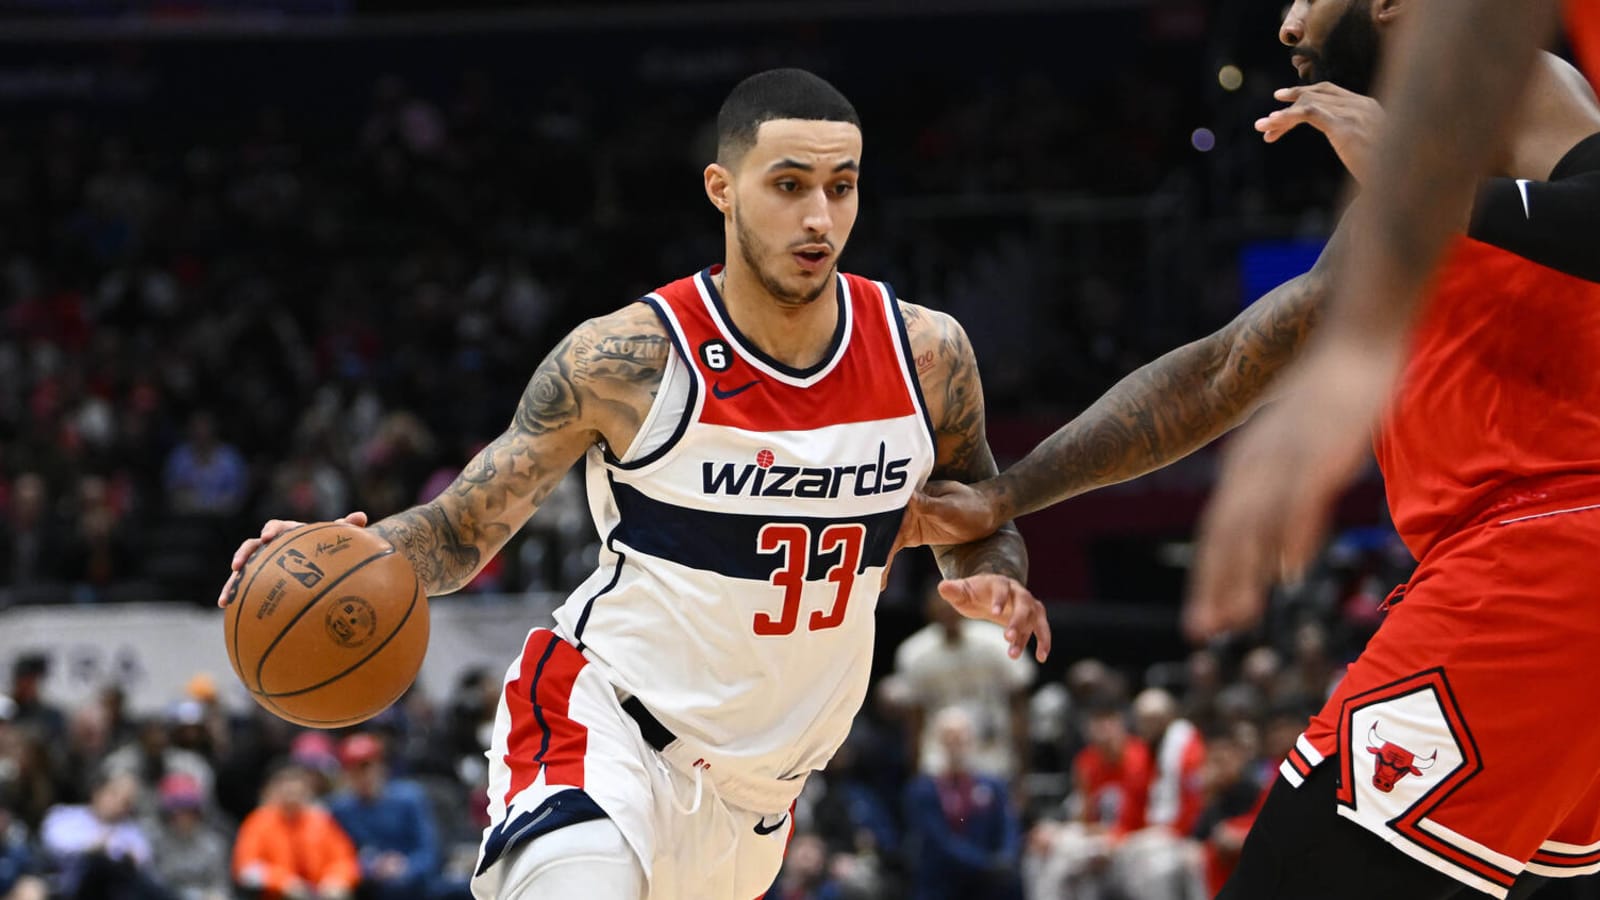 Wizards likely to trade one more player to guarentee Kyle Kuzma, Kristaps Porzingis new deals